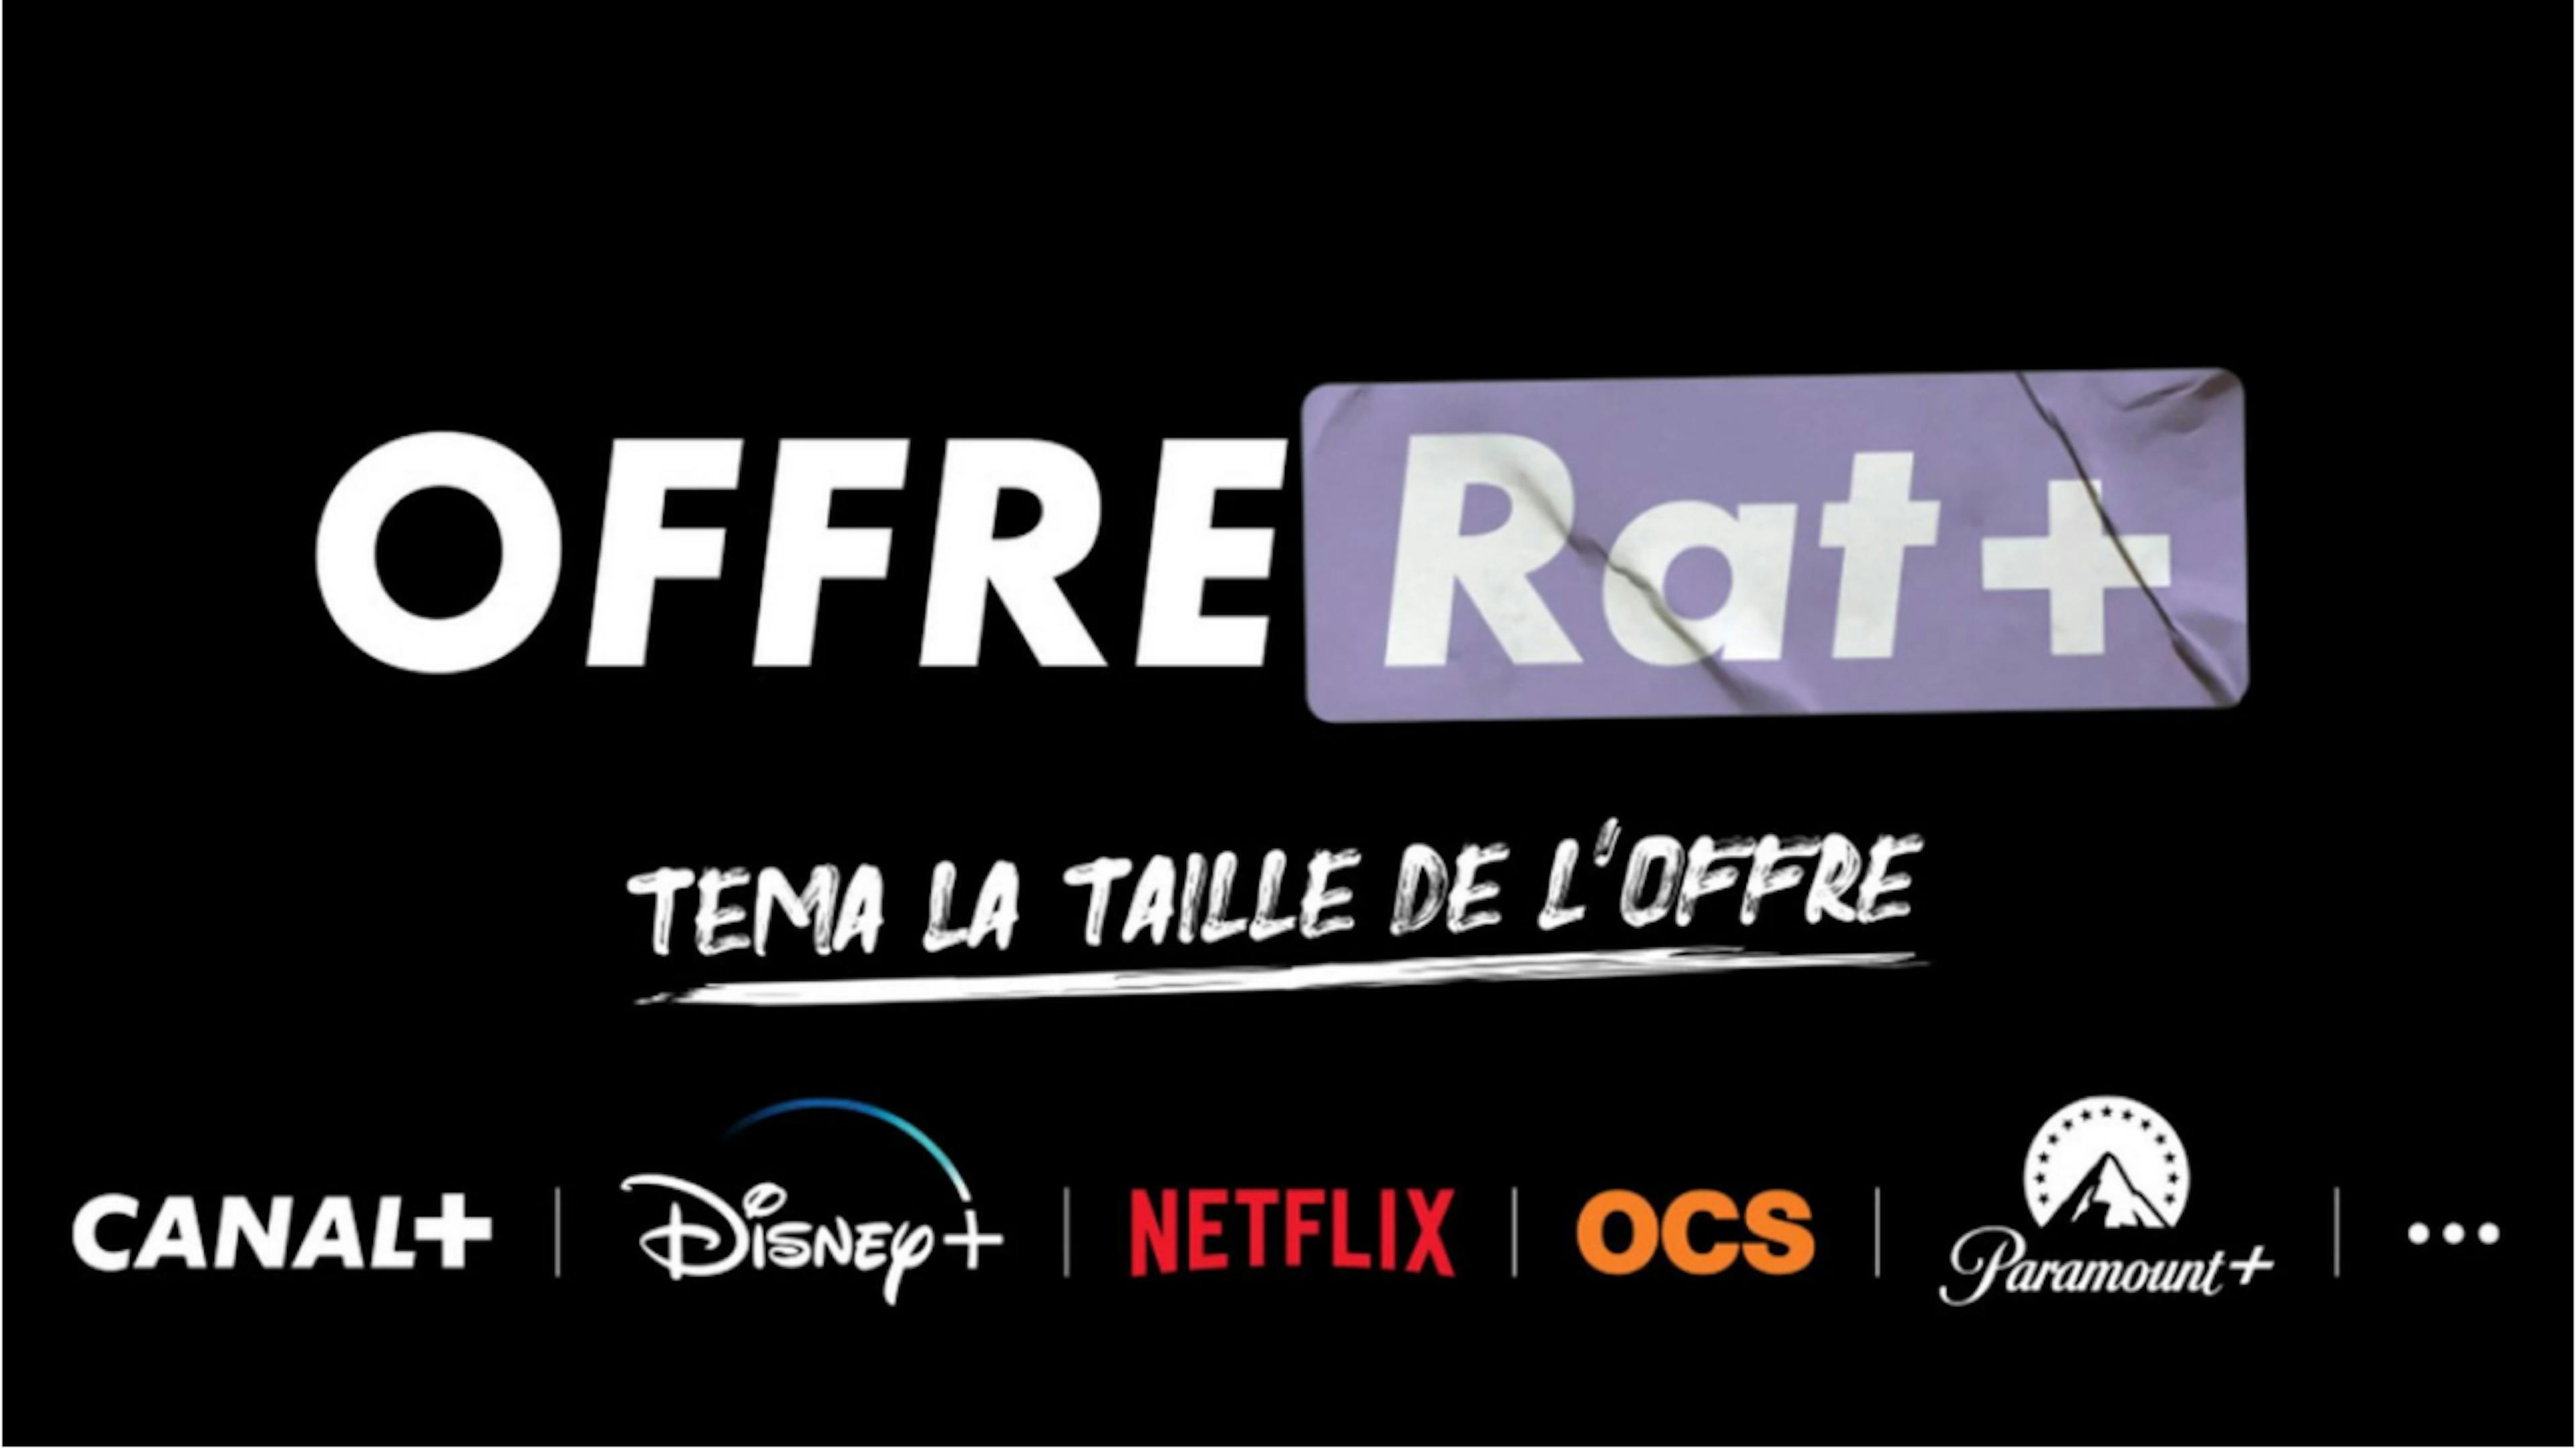 Rat+ Offer - Canal+